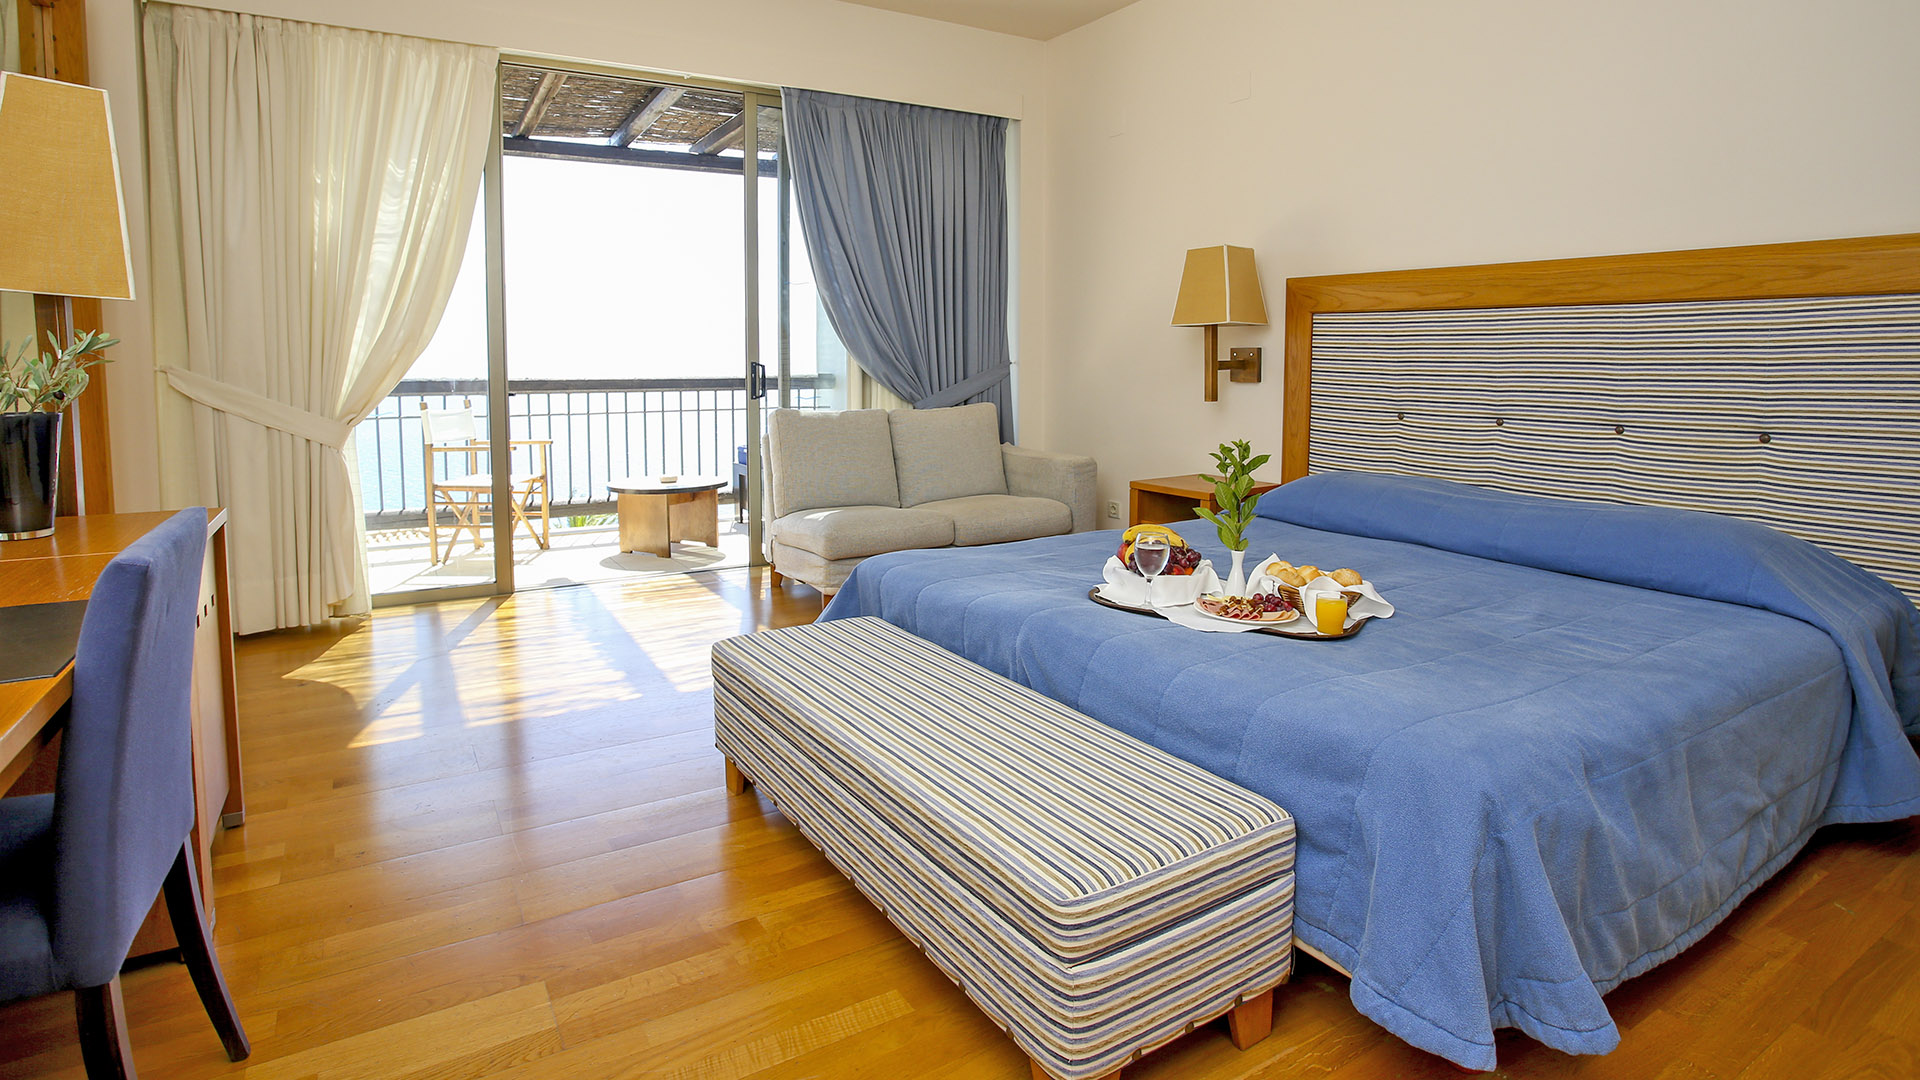 5* Ionian Blue Hotel Bungalows &amp; Spa Resort - Λευκάδα ✦ -48% ✦ 3 Ημέρες (2 Διανυκτερεύσεις) ✦ 2 άτομα + 1 παιδί έως 6 ετών ✦ 8 ✦ Πρωτομαγιά (28/04/2023 έως 01/05/2023) ✦ Early check in και Late check out κατόπιν διαθεσιμότητας!